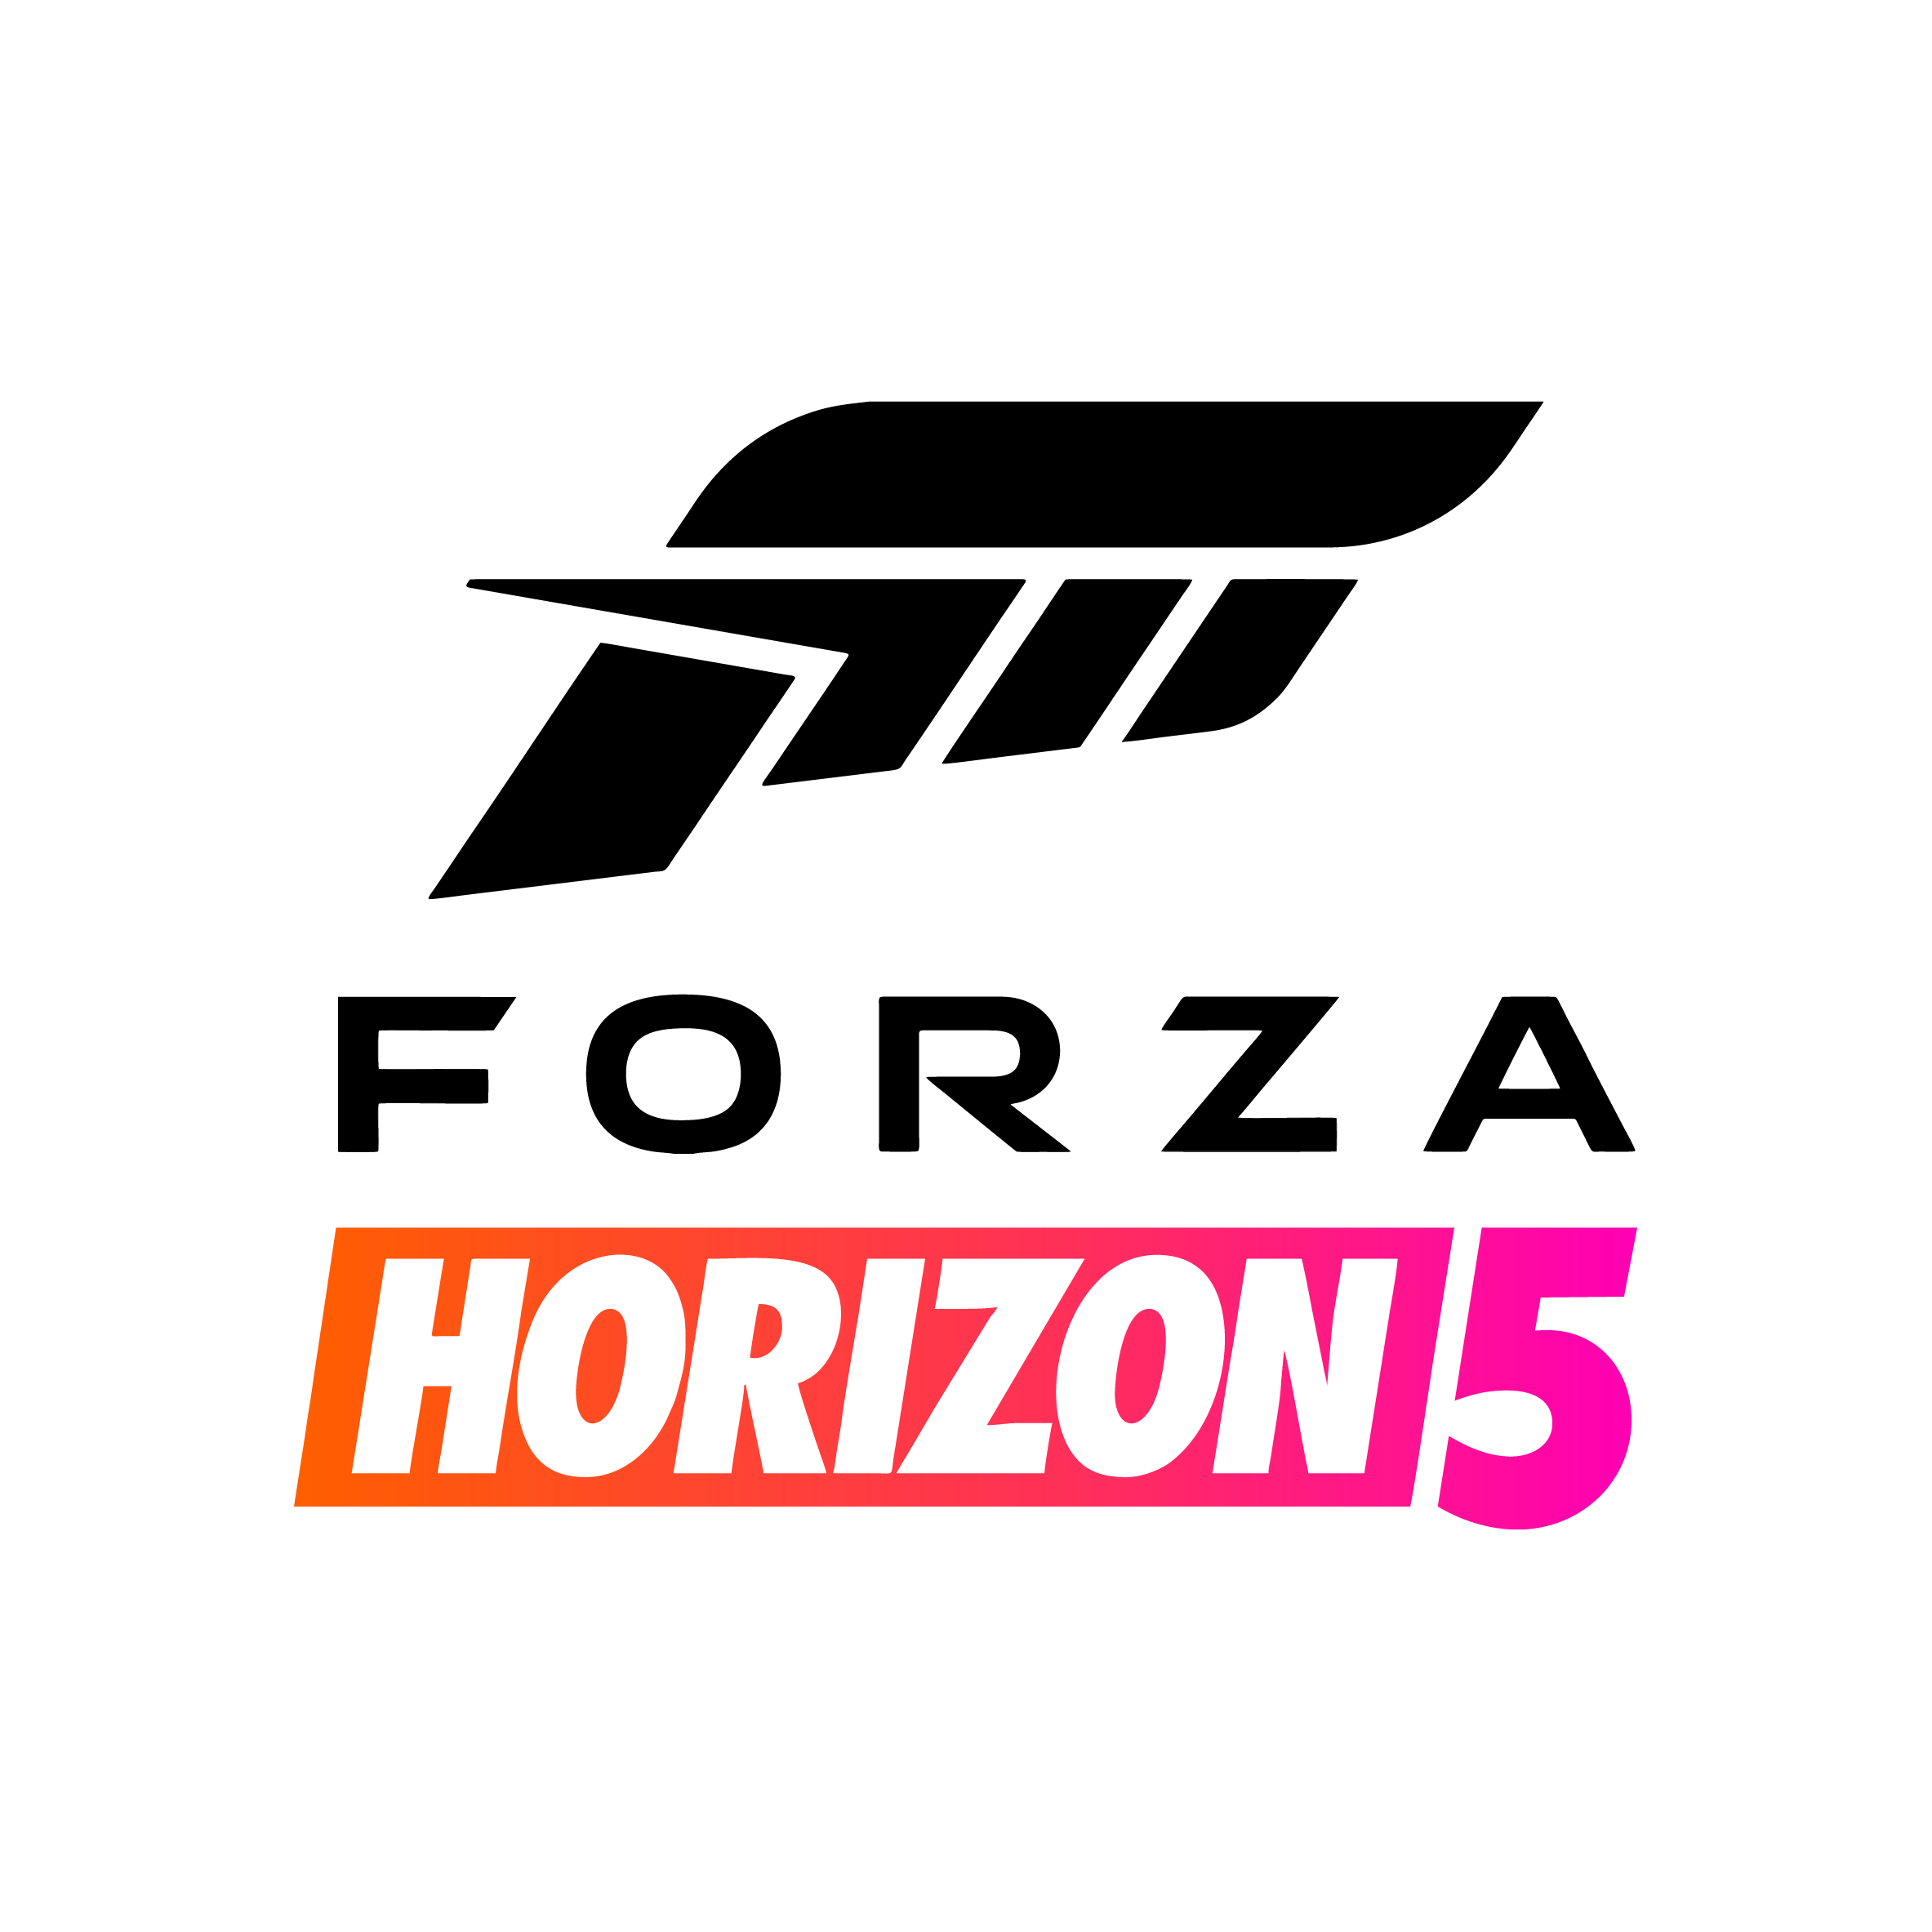 Forza Horizon Crack 5 With License Key 2022 Free Download